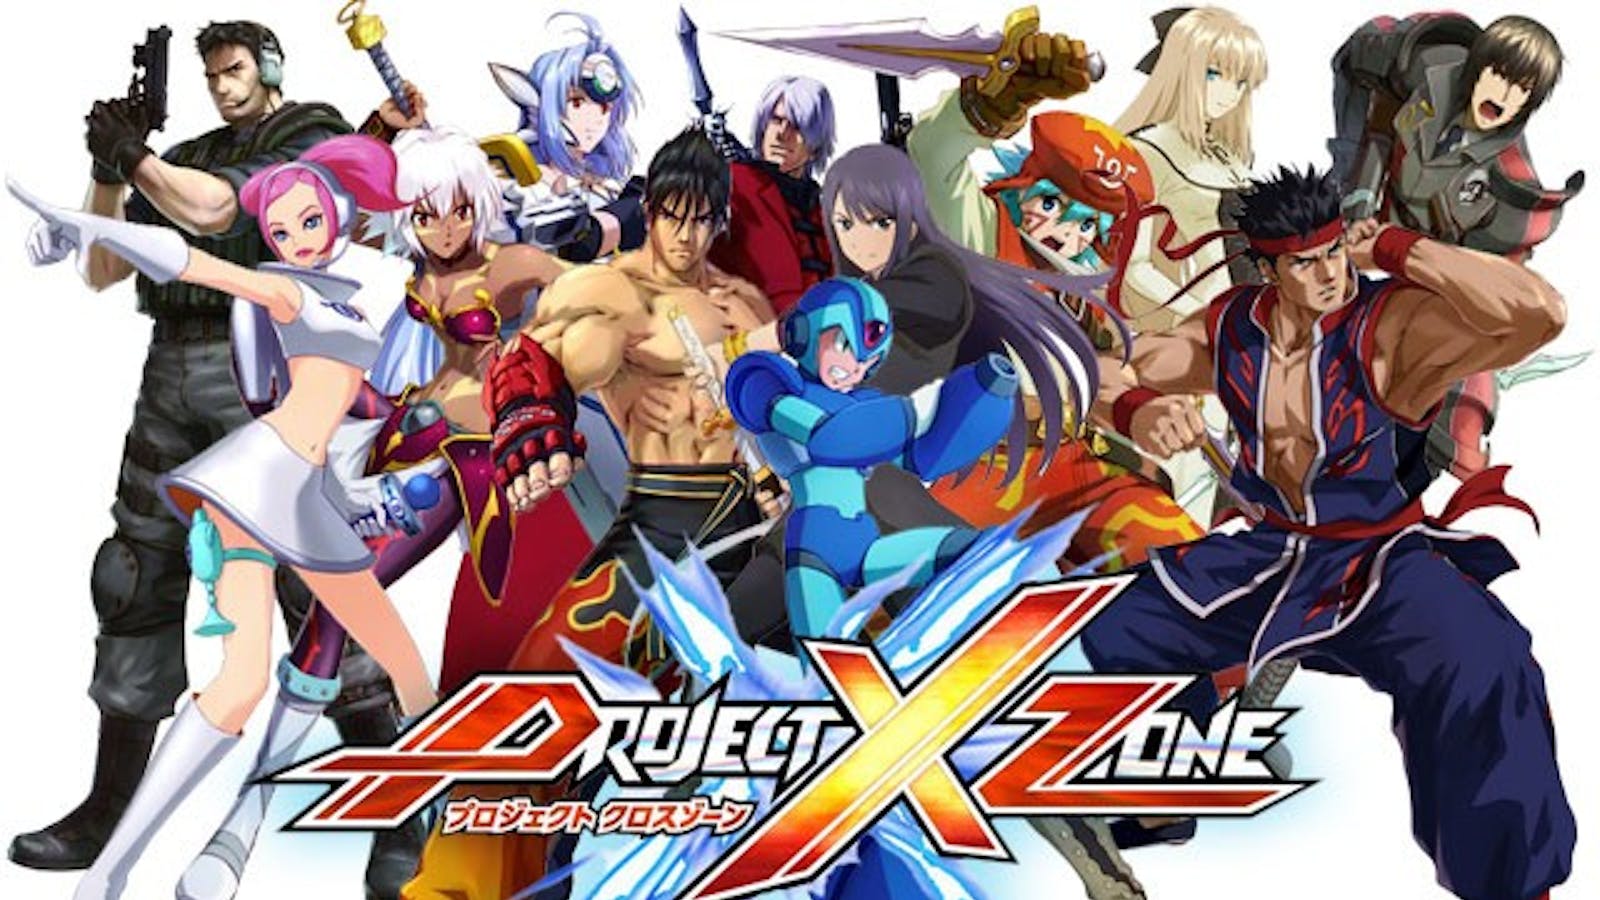 The Video Game Odyssey: Project X Zone is coming to America! - The